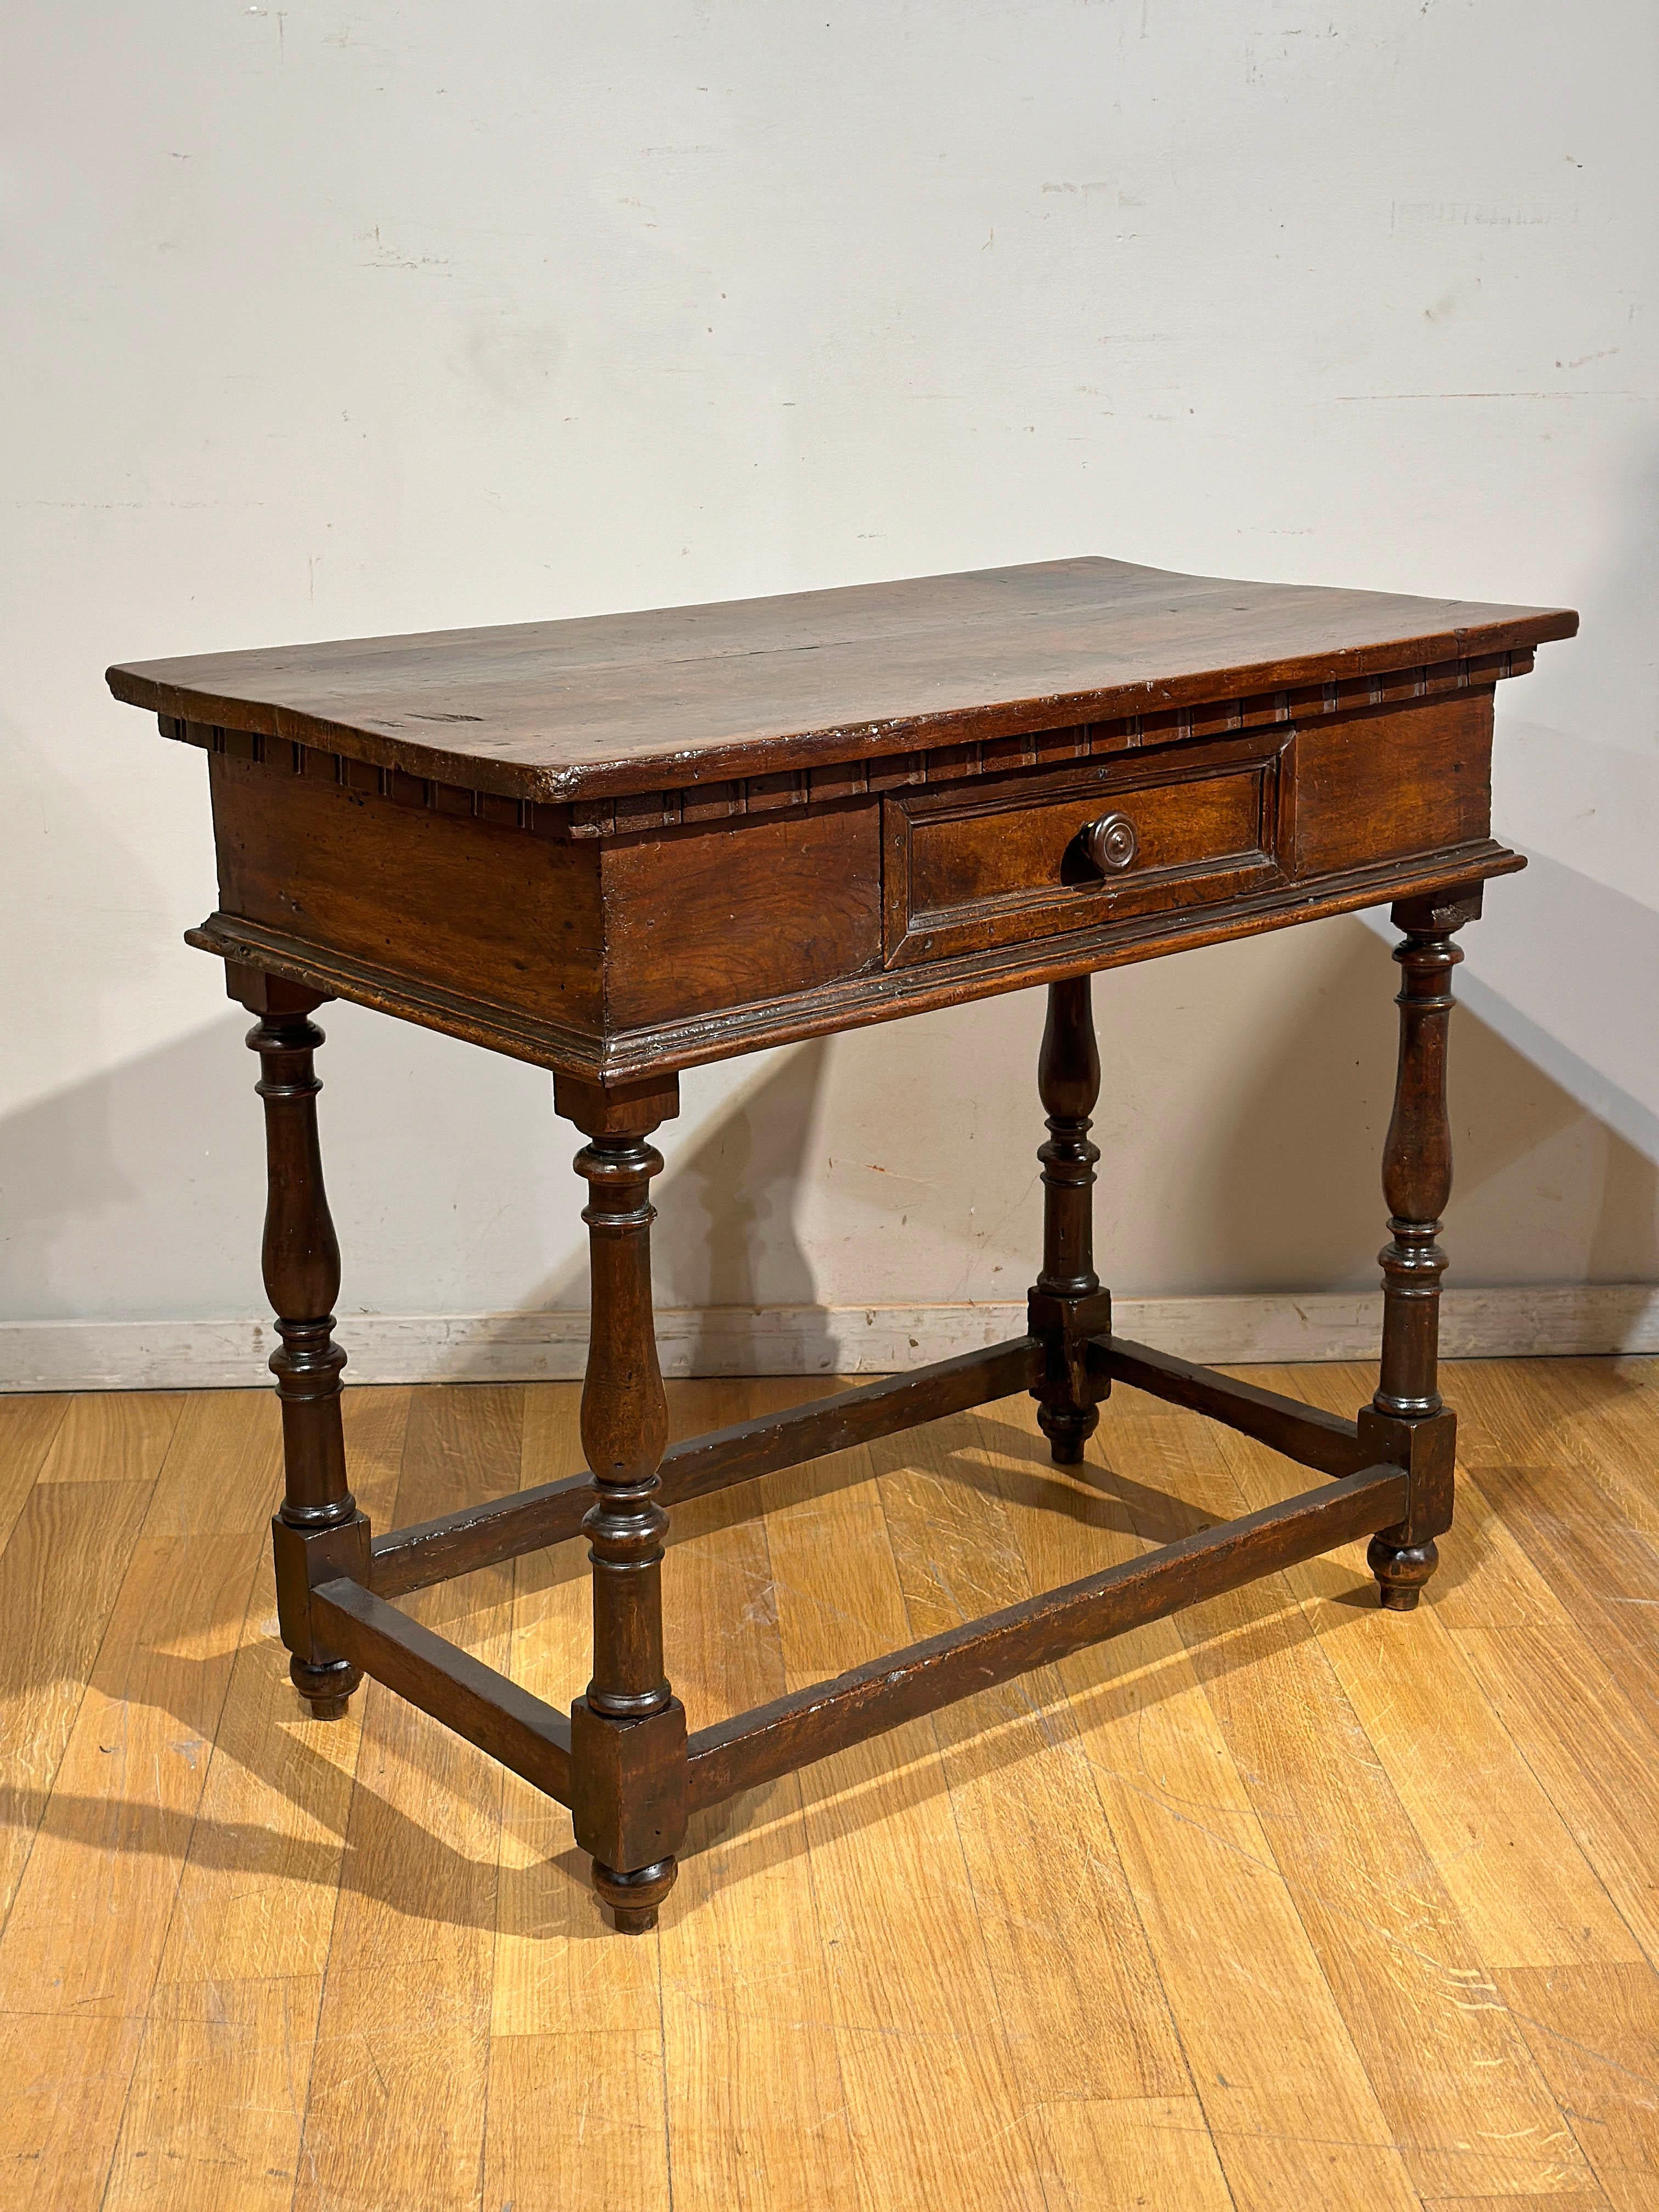 END OF THE 16th CENTURY LOUIS XIV TABLE WITH DRAWER In Good Condition For Sale In Firenze, FI